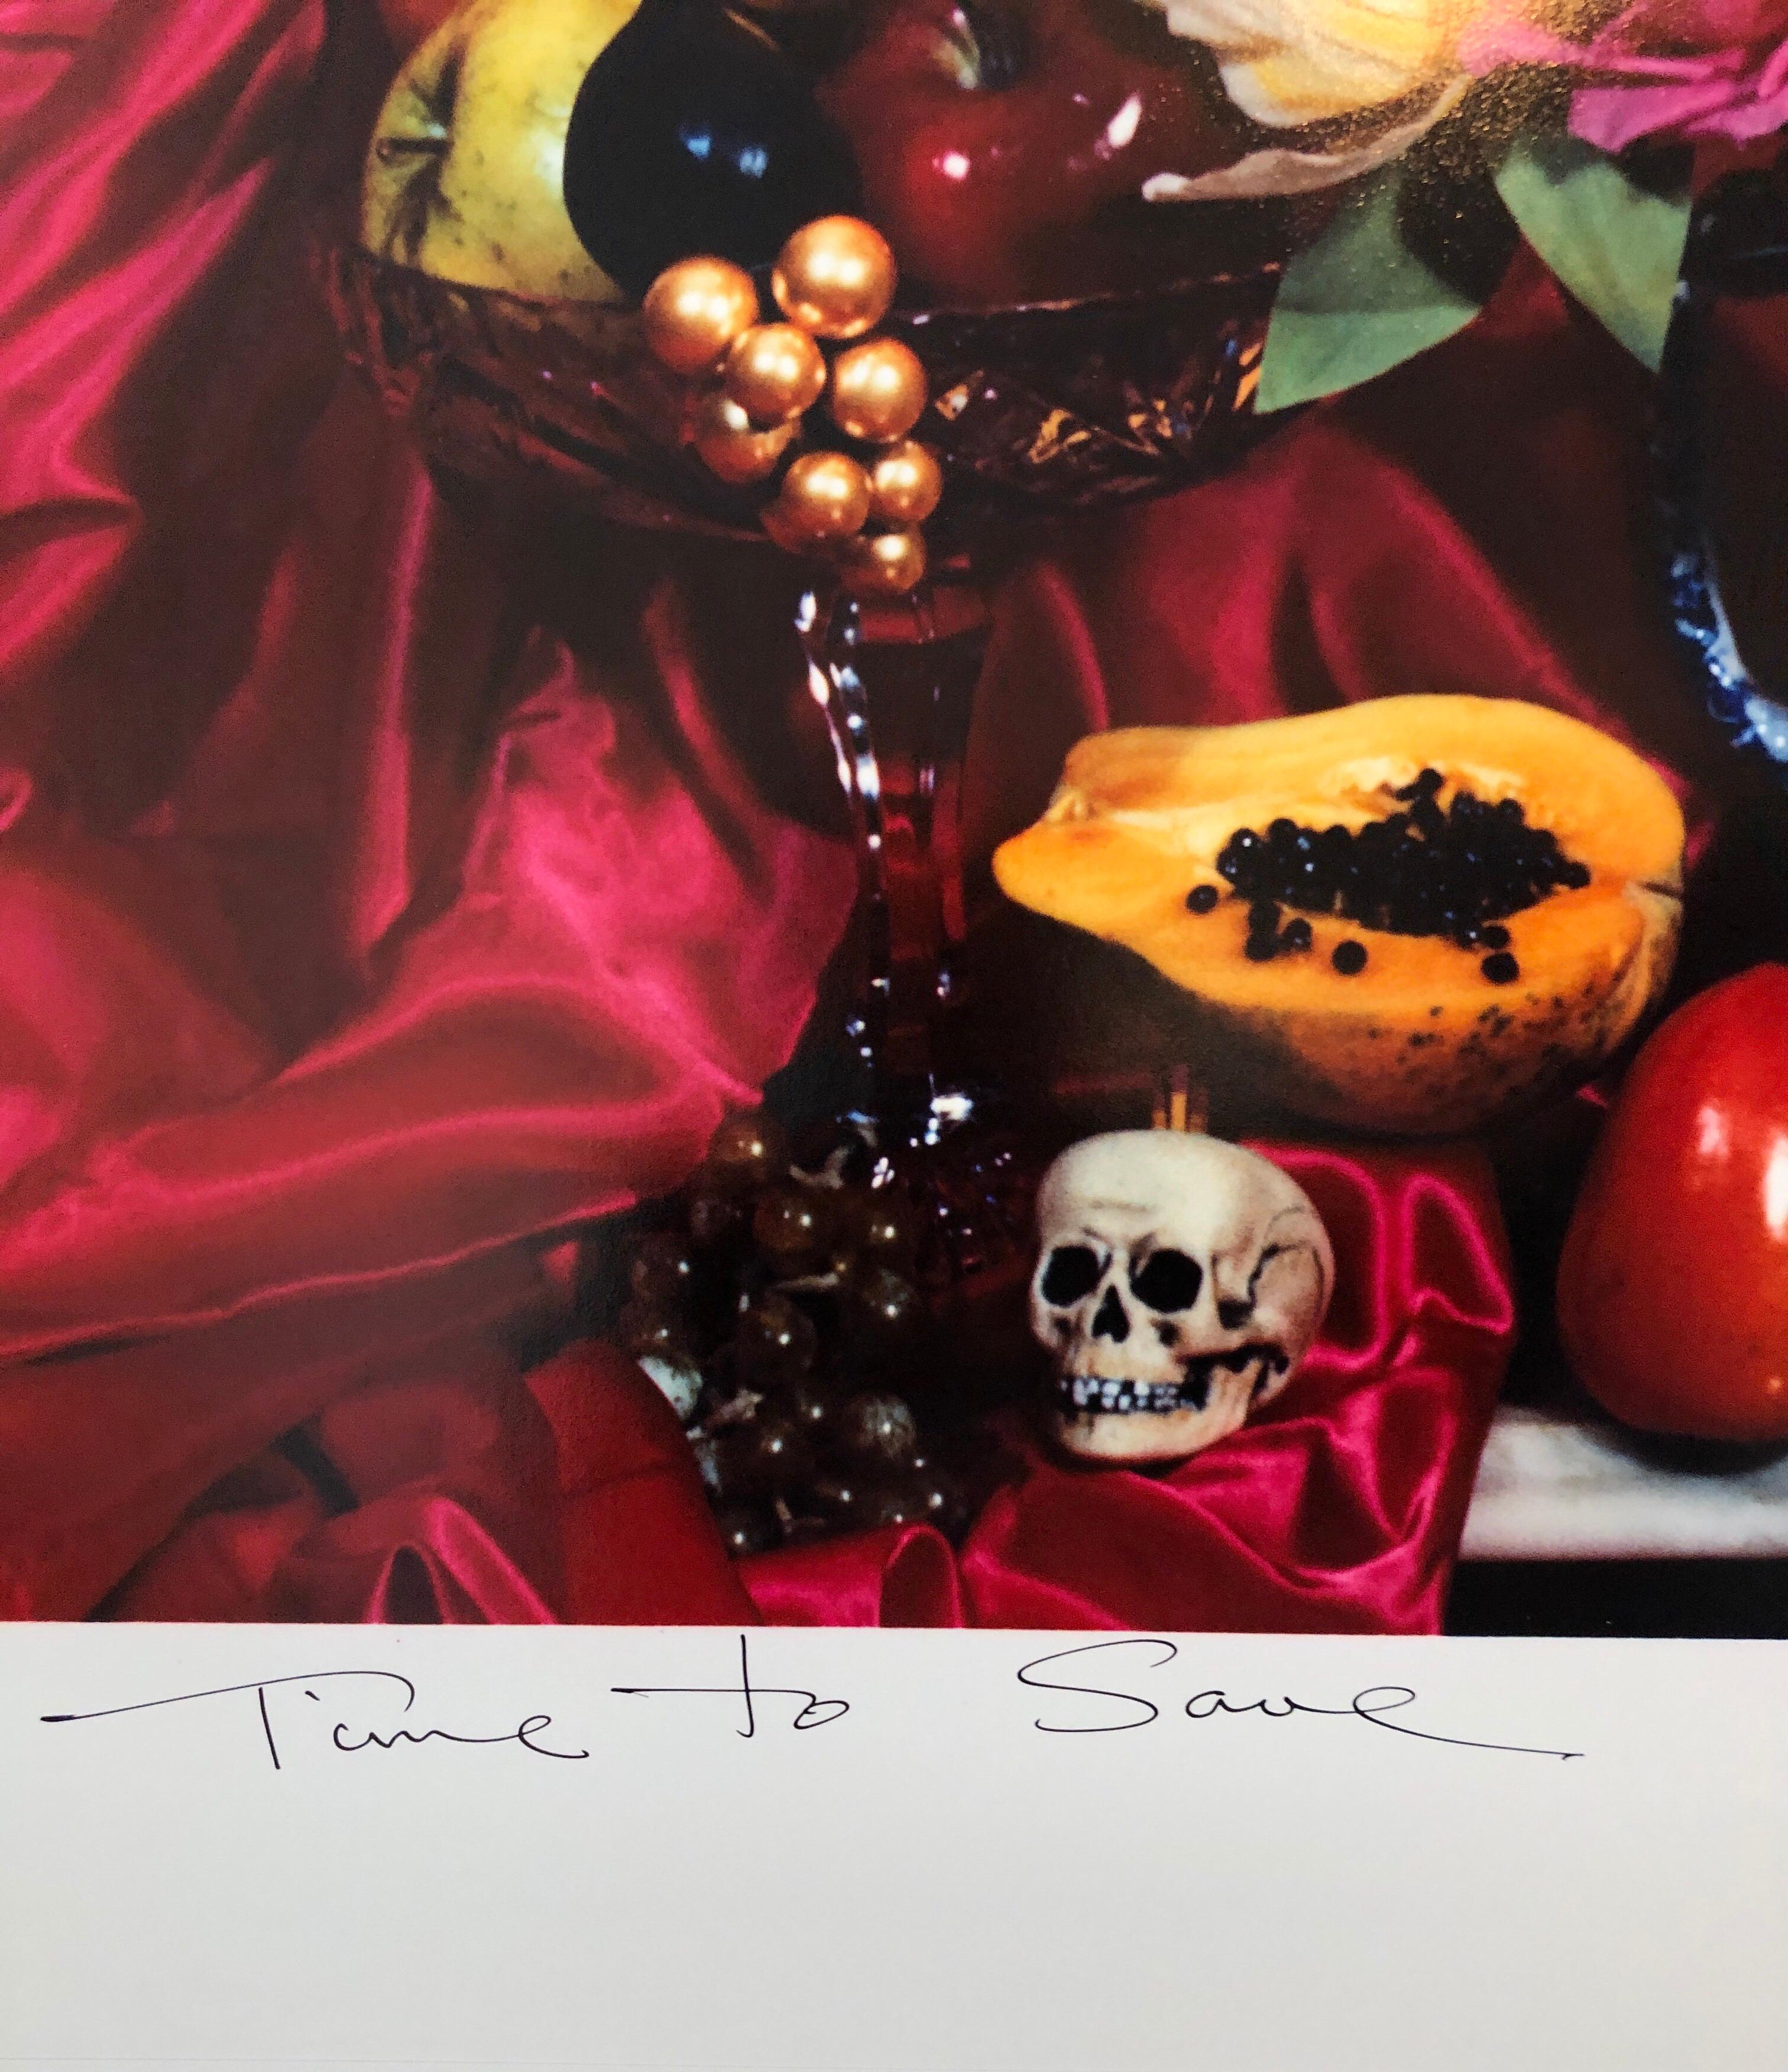 Hand signed and titled in ink by the artist from edition of 50 (plus proofs). Color Photo printed at CVI Lab by master printer Guy Stricherz. Published by Prestige Art Ltd. From the color saturated 1980's. 